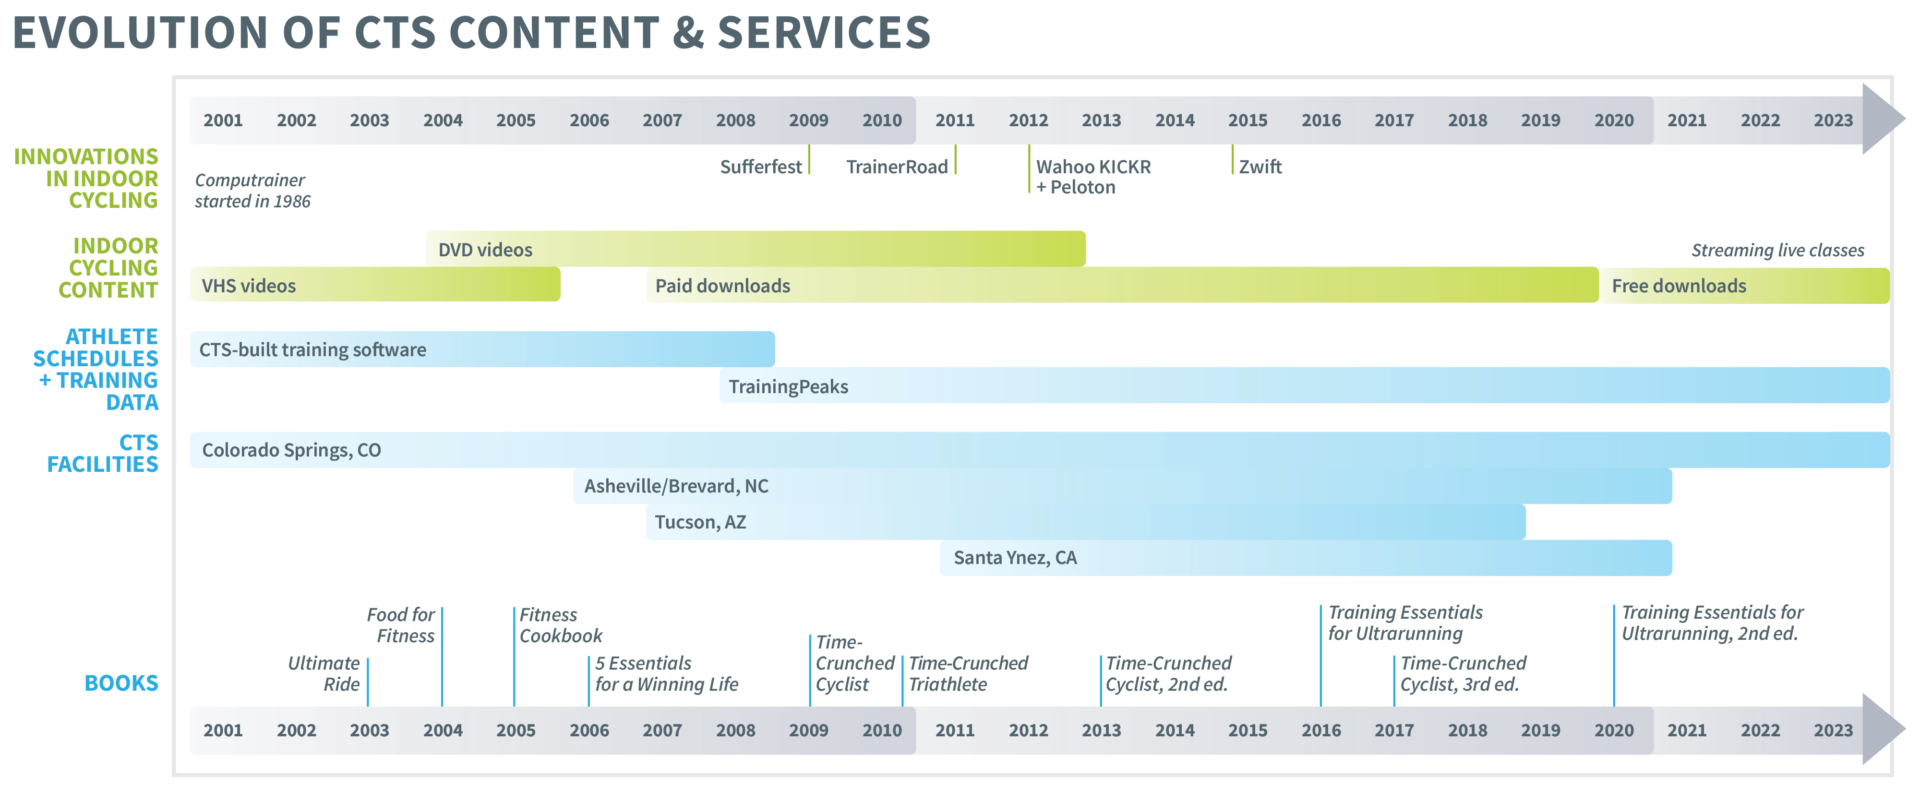 Timeline showing the evolution of CTS's content and services.